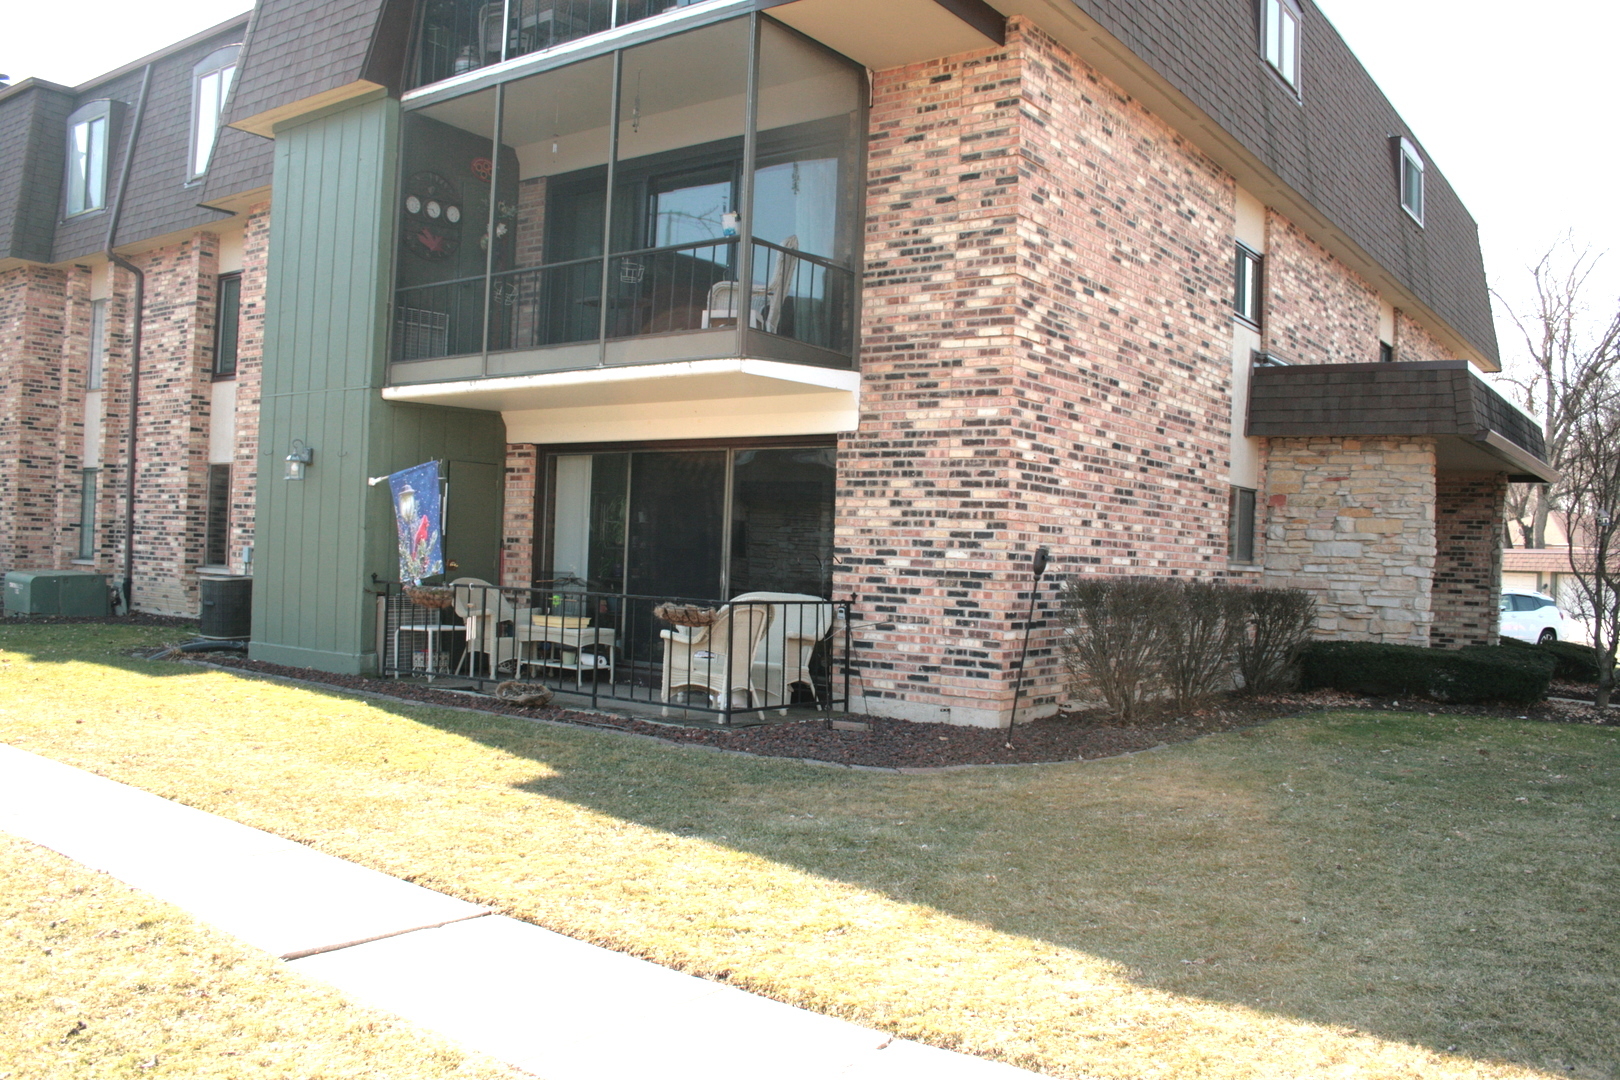 a view of outdoor space yard and porch